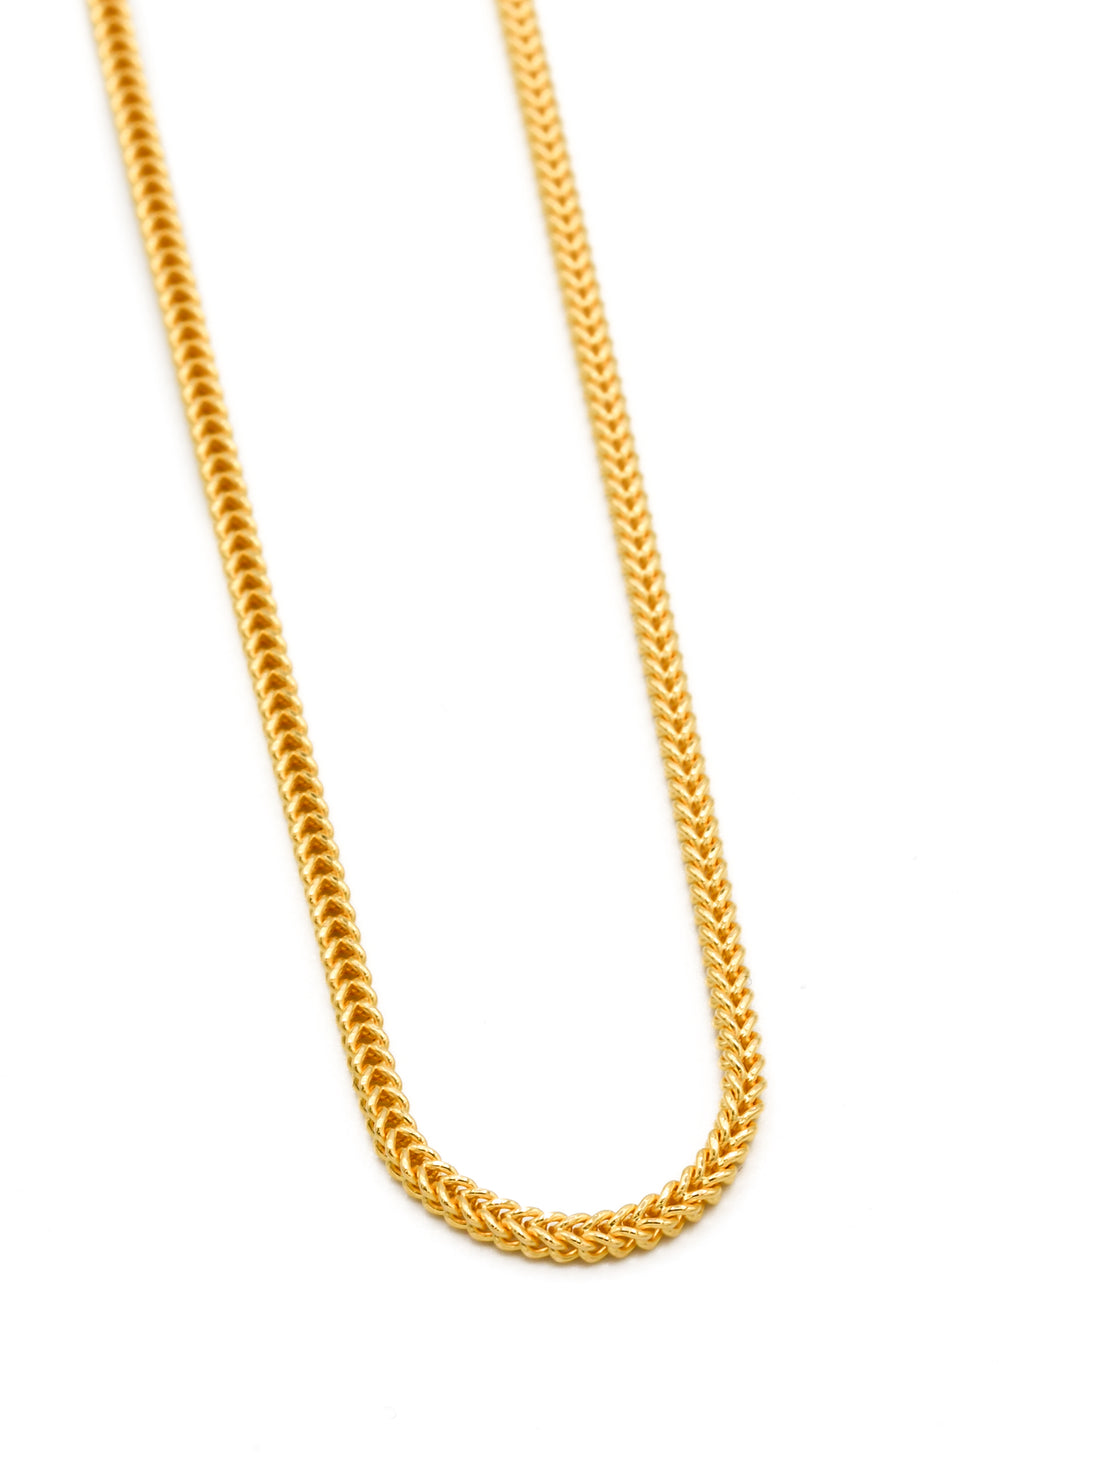 22ct Gold Hollow Fox Tail Chain - 45 CM - Roop Darshan